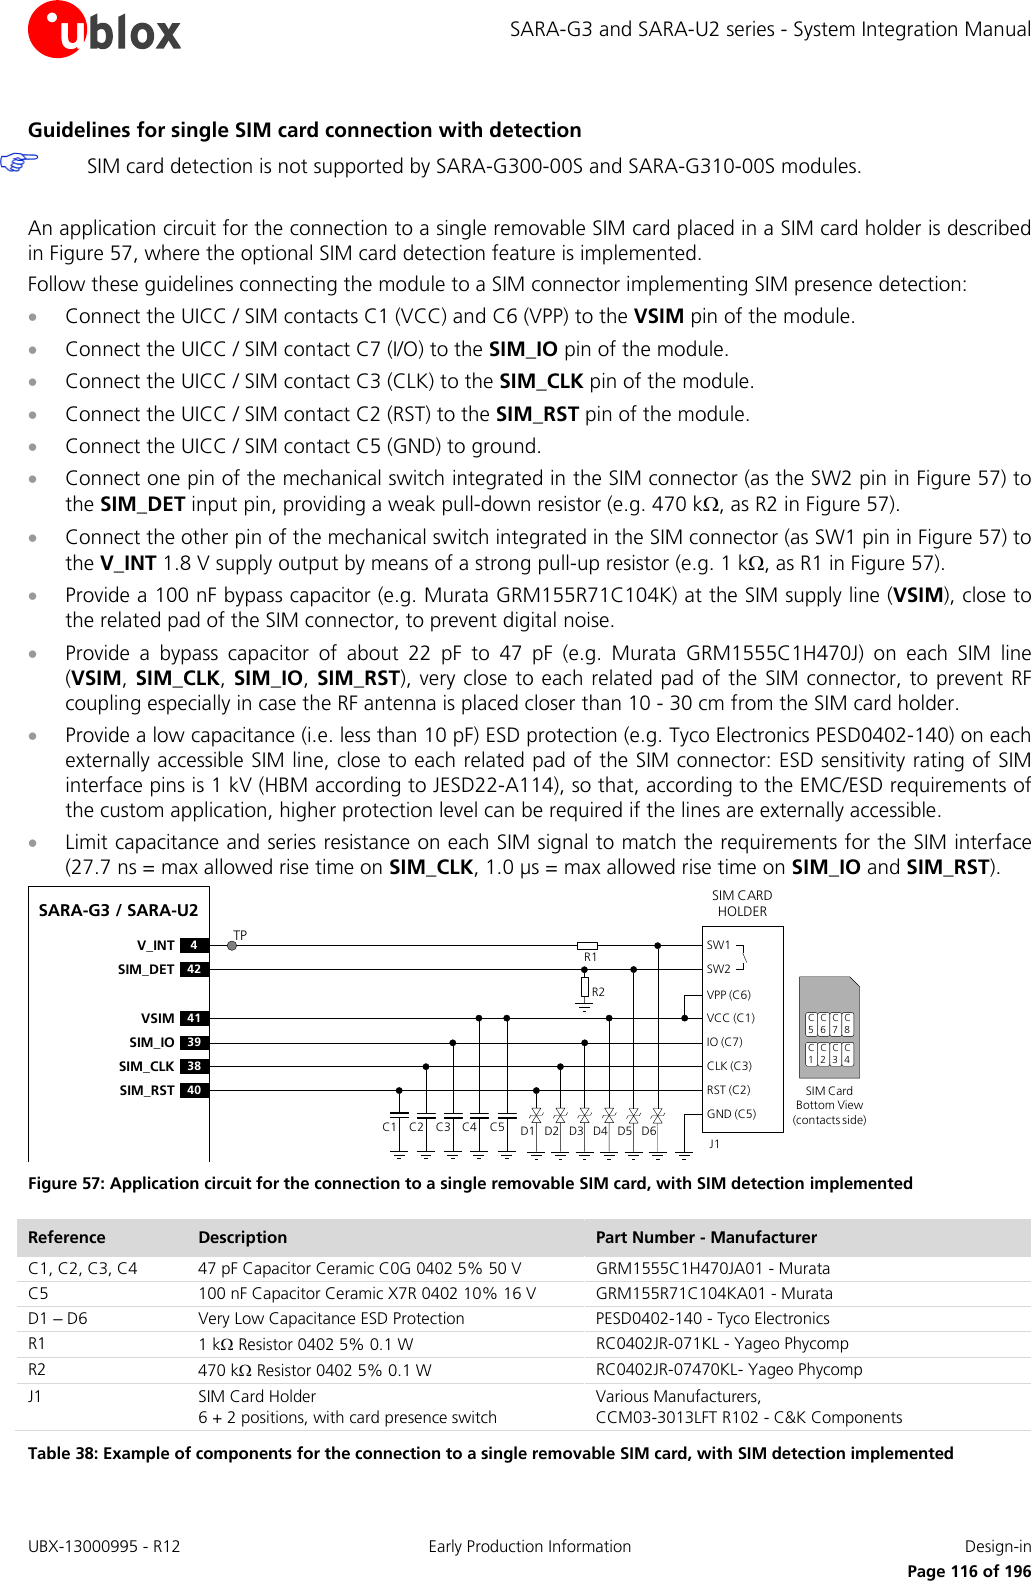 SARA-G3 and SARA-U2 series - System Integration Manual Guidelines for single SIM card connection with detection  SIM card detection is not supported by SARA-G300-00S and SARA-G310-00S modules.  An application circuit for the connection to a single removable SIM card placed in a SIM card holder is described in Figure 57, where the optional SIM card detection feature is implemented. Follow these guidelines connecting the module to a SIM connector implementing SIM presence detection: • Connect the UICC / SIM contacts C1 (VCC) and C6 (VPP) to the VSIM pin of the module. • Connect the UICC / SIM contact C7 (I/O) to the SIM_IO pin of the module. • Connect the UICC / SIM contact C3 (CLK) to the SIM_CLK pin of the module. • Connect the UICC / SIM contact C2 (RST) to the SIM_RST pin of the module. • Connect the UICC / SIM contact C5 (GND) to ground. • Connect one pin of the mechanical switch integrated in the SIM connector (as the SW2 pin in Figure 57) to the SIM_DET input pin, providing a weak pull-down resistor (e.g. 470 kΩ, as R2 in Figure 57). • Connect the other pin of the mechanical switch integrated in the SIM connector (as SW1 pin in Figure 57) to the V_INT 1.8 V supply output by means of a strong pull-up resistor (e.g. 1 kΩ, as R1 in Figure 57). • Provide a 100 nF bypass capacitor (e.g. Murata GRM155R71C104K) at the SIM supply line (VSIM), close to the related pad of the SIM connector, to prevent digital noise.  • Provide a bypass capacitor of about 22 pF to 47 pF (e.g. Murata GRM1555C1H470J) on each SIM line (VSIM, SIM_CLK, SIM_IO,  SIM_RST), very close to each related pad of the SIM connector, to prevent RF coupling especially in case the RF antenna is placed closer than 10 - 30 cm from the SIM card holder. • Provide a low capacitance (i.e. less than 10 pF) ESD protection (e.g. Tyco Electronics PESD0402-140) on each externally accessible SIM line, close to each related pad of the SIM connector: ESD sensitivity rating of SIM interface pins is 1 kV (HBM according to JESD22-A114), so that, according to the EMC/ESD requirements of the custom application, higher protection level can be required if the lines are externally accessible.  • Limit capacitance and series resistance on each SIM signal to match the requirements for the SIM interface (27.7 ns = max allowed rise time on SIM_CLK, 1.0 µs = max allowed rise time on SIM_IO and SIM_RST). SARA-G3 / SARA-U241VSIM39SIM_IO38SIM_CLK40SIM_RST4V_INT42SIM_DETSIM CARD HOLDERC5C6C7C1C2C3SIM Card Bottom View (contacts side)C1VPP (C6)VCC (C1)IO (C7)CLK (C3)RST (C2)GND (C5)C2 C3 C5J1C4SW1SW2D1 D2 D3 D4 D5 D6R2R1C8C4TP Figure 57: Application circuit for the connection to a single removable SIM card, with SIM detection implemented Reference Description Part Number - Manufacturer C1, C2, C3, C4 47 pF Capacitor Ceramic C0G 0402 5% 50 V GRM1555C1H470JA01 - Murata C5 100 nF Capacitor Ceramic X7R 0402 10% 16 V GRM155R71C104KA01 - Murata D1 – D6 Very Low Capacitance ESD Protection PESD0402-140 - Tyco Electronics  R1 1 kΩ Resistor 0402 5% 0.1 W RC0402JR-071KL - Yageo Phycomp R2 470 kΩ Resistor 0402 5% 0.1 W RC0402JR-07470KL- Yageo Phycomp J1 SIM Card Holder 6 + 2 positions, with card presence switch Various Manufacturers, CCM03-3013LFT R102 - C&amp;K Components Table 38: Example of components for the connection to a single removable SIM card, with SIM detection implemented  UBX-13000995 - R12 Early Production Information Design-in     Page 116 of 196 